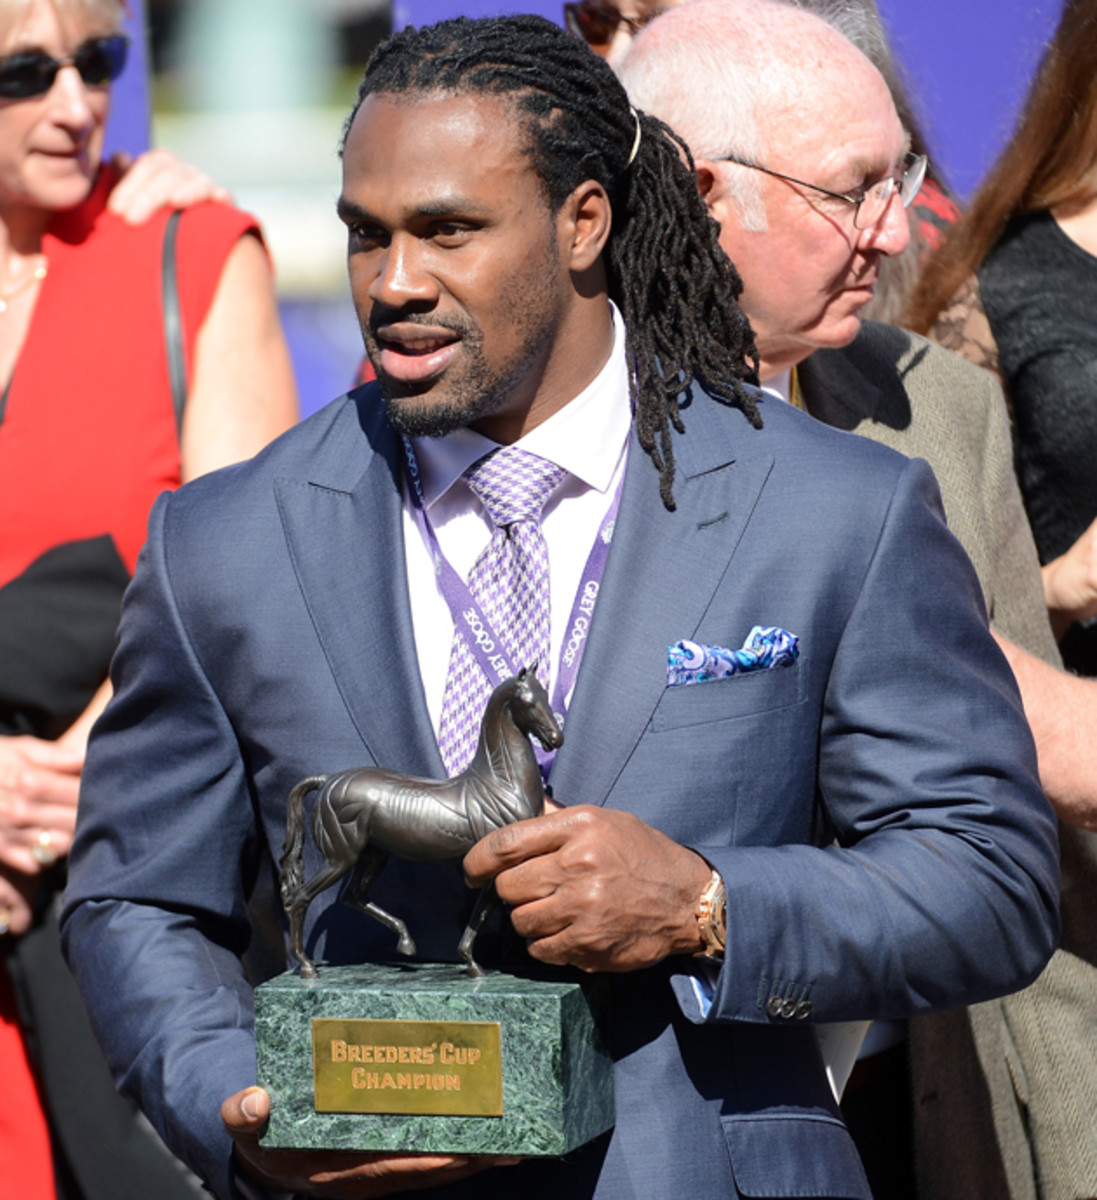 Falcons running back Steven Jackson savored his inside access at the 2012 Breeders’ Cup Classic